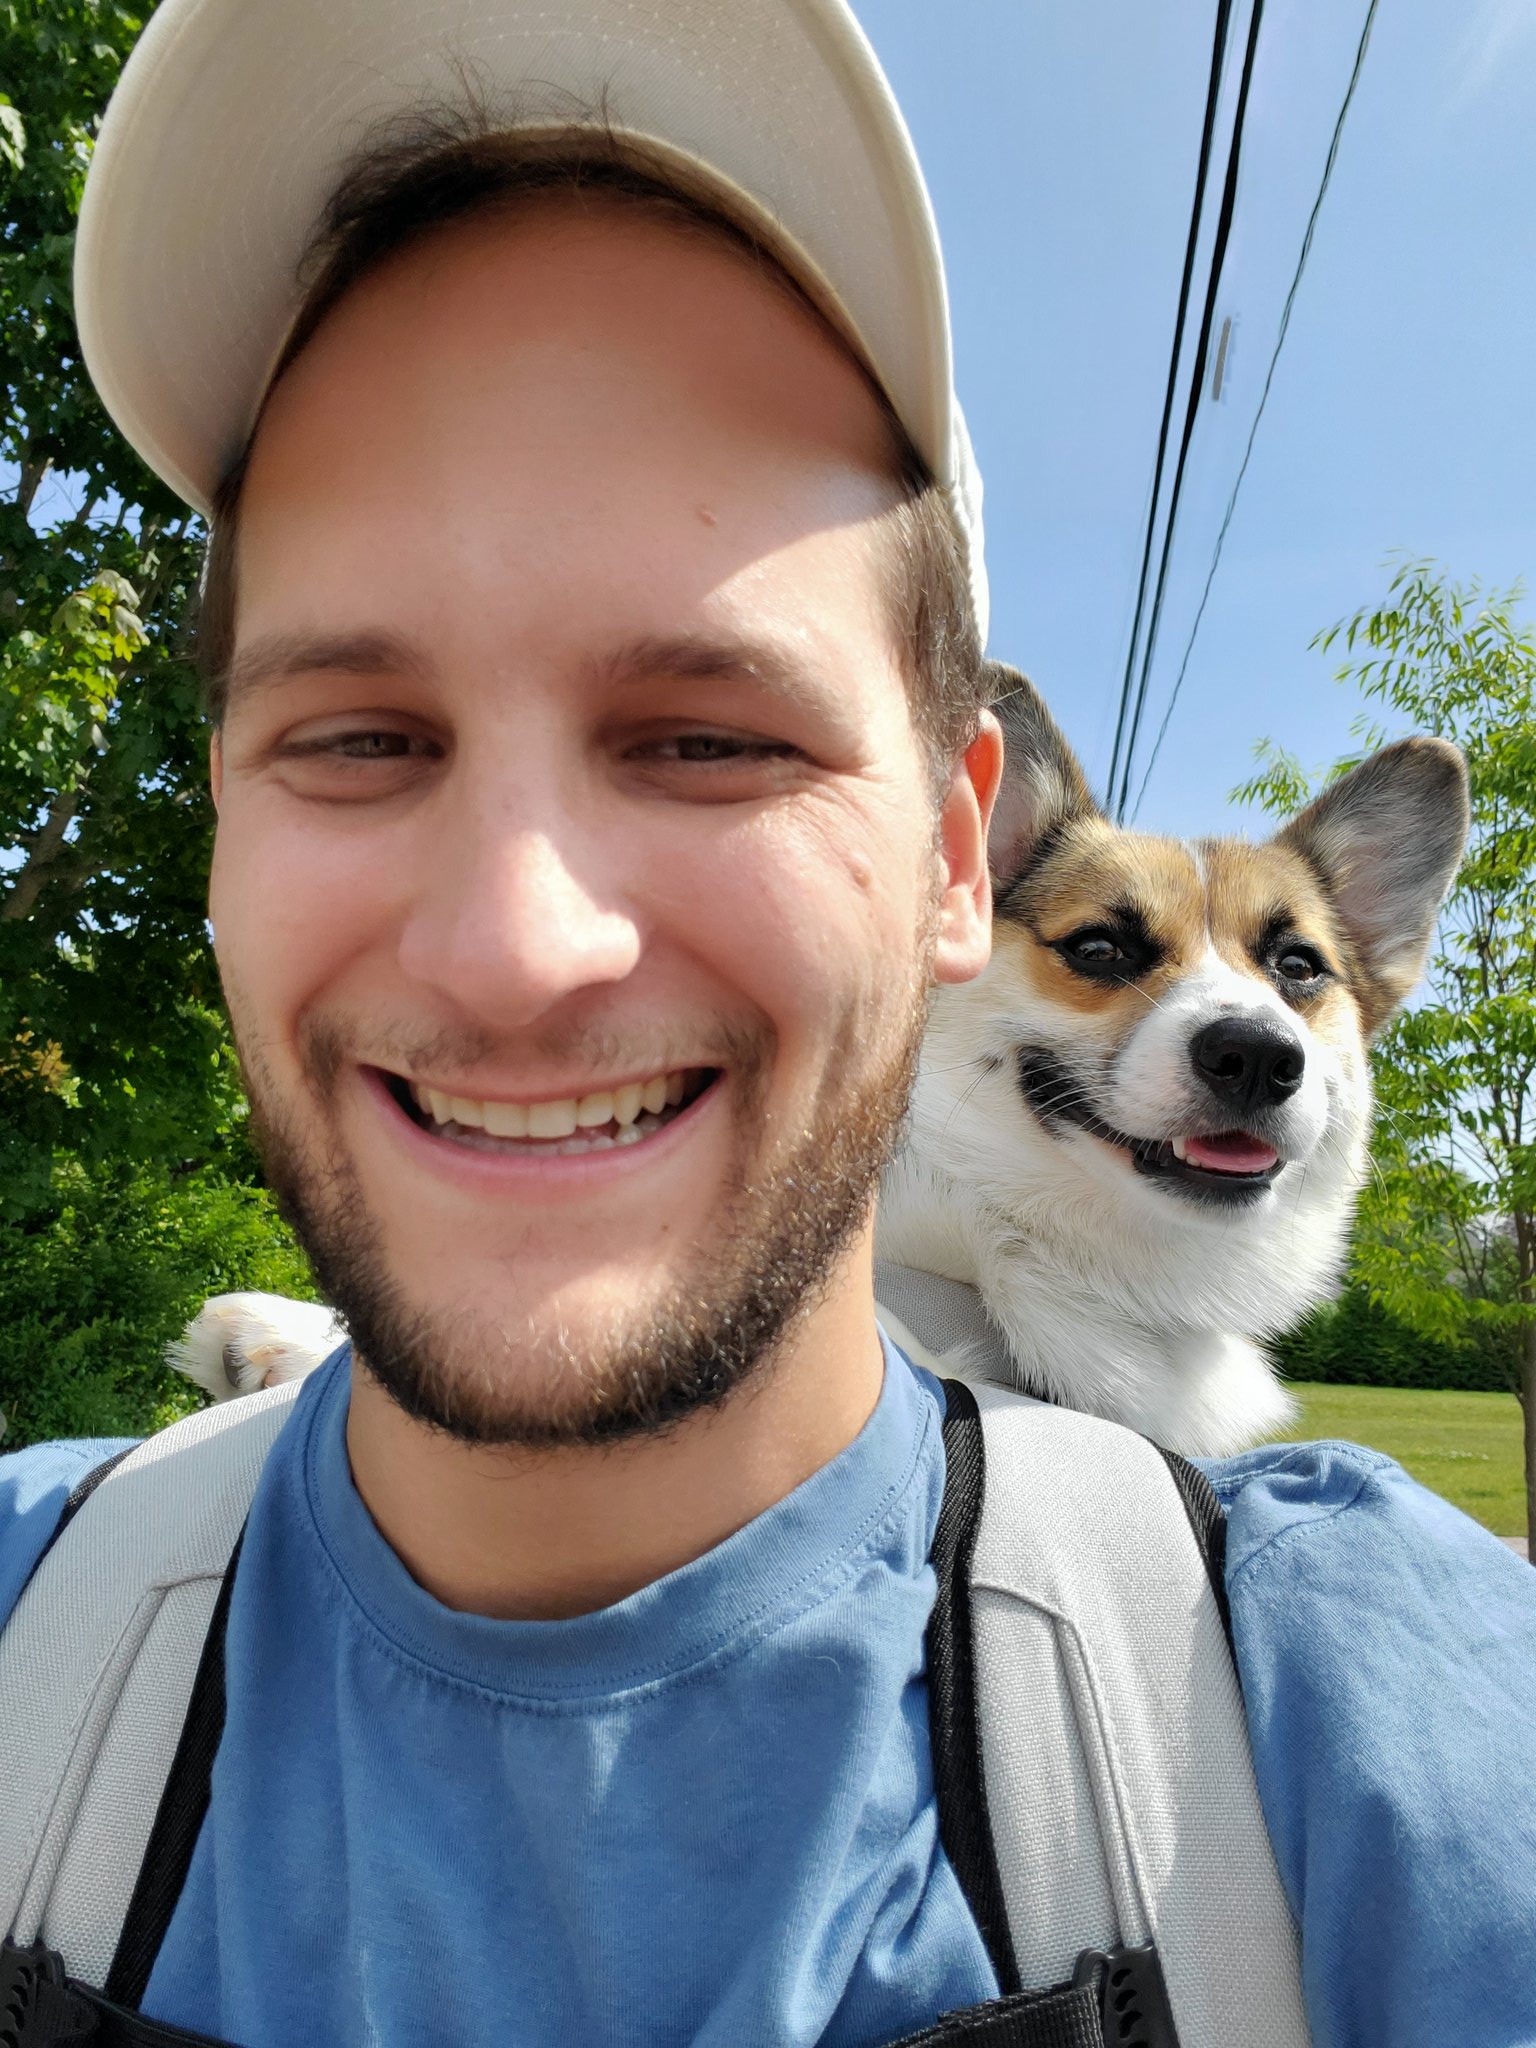 FlygonHG on Twitter: "I'm legally required to share a picture every time Poppy and I use her Corgi Backpack https://t.co/Kz184xX3tw" / Twitter